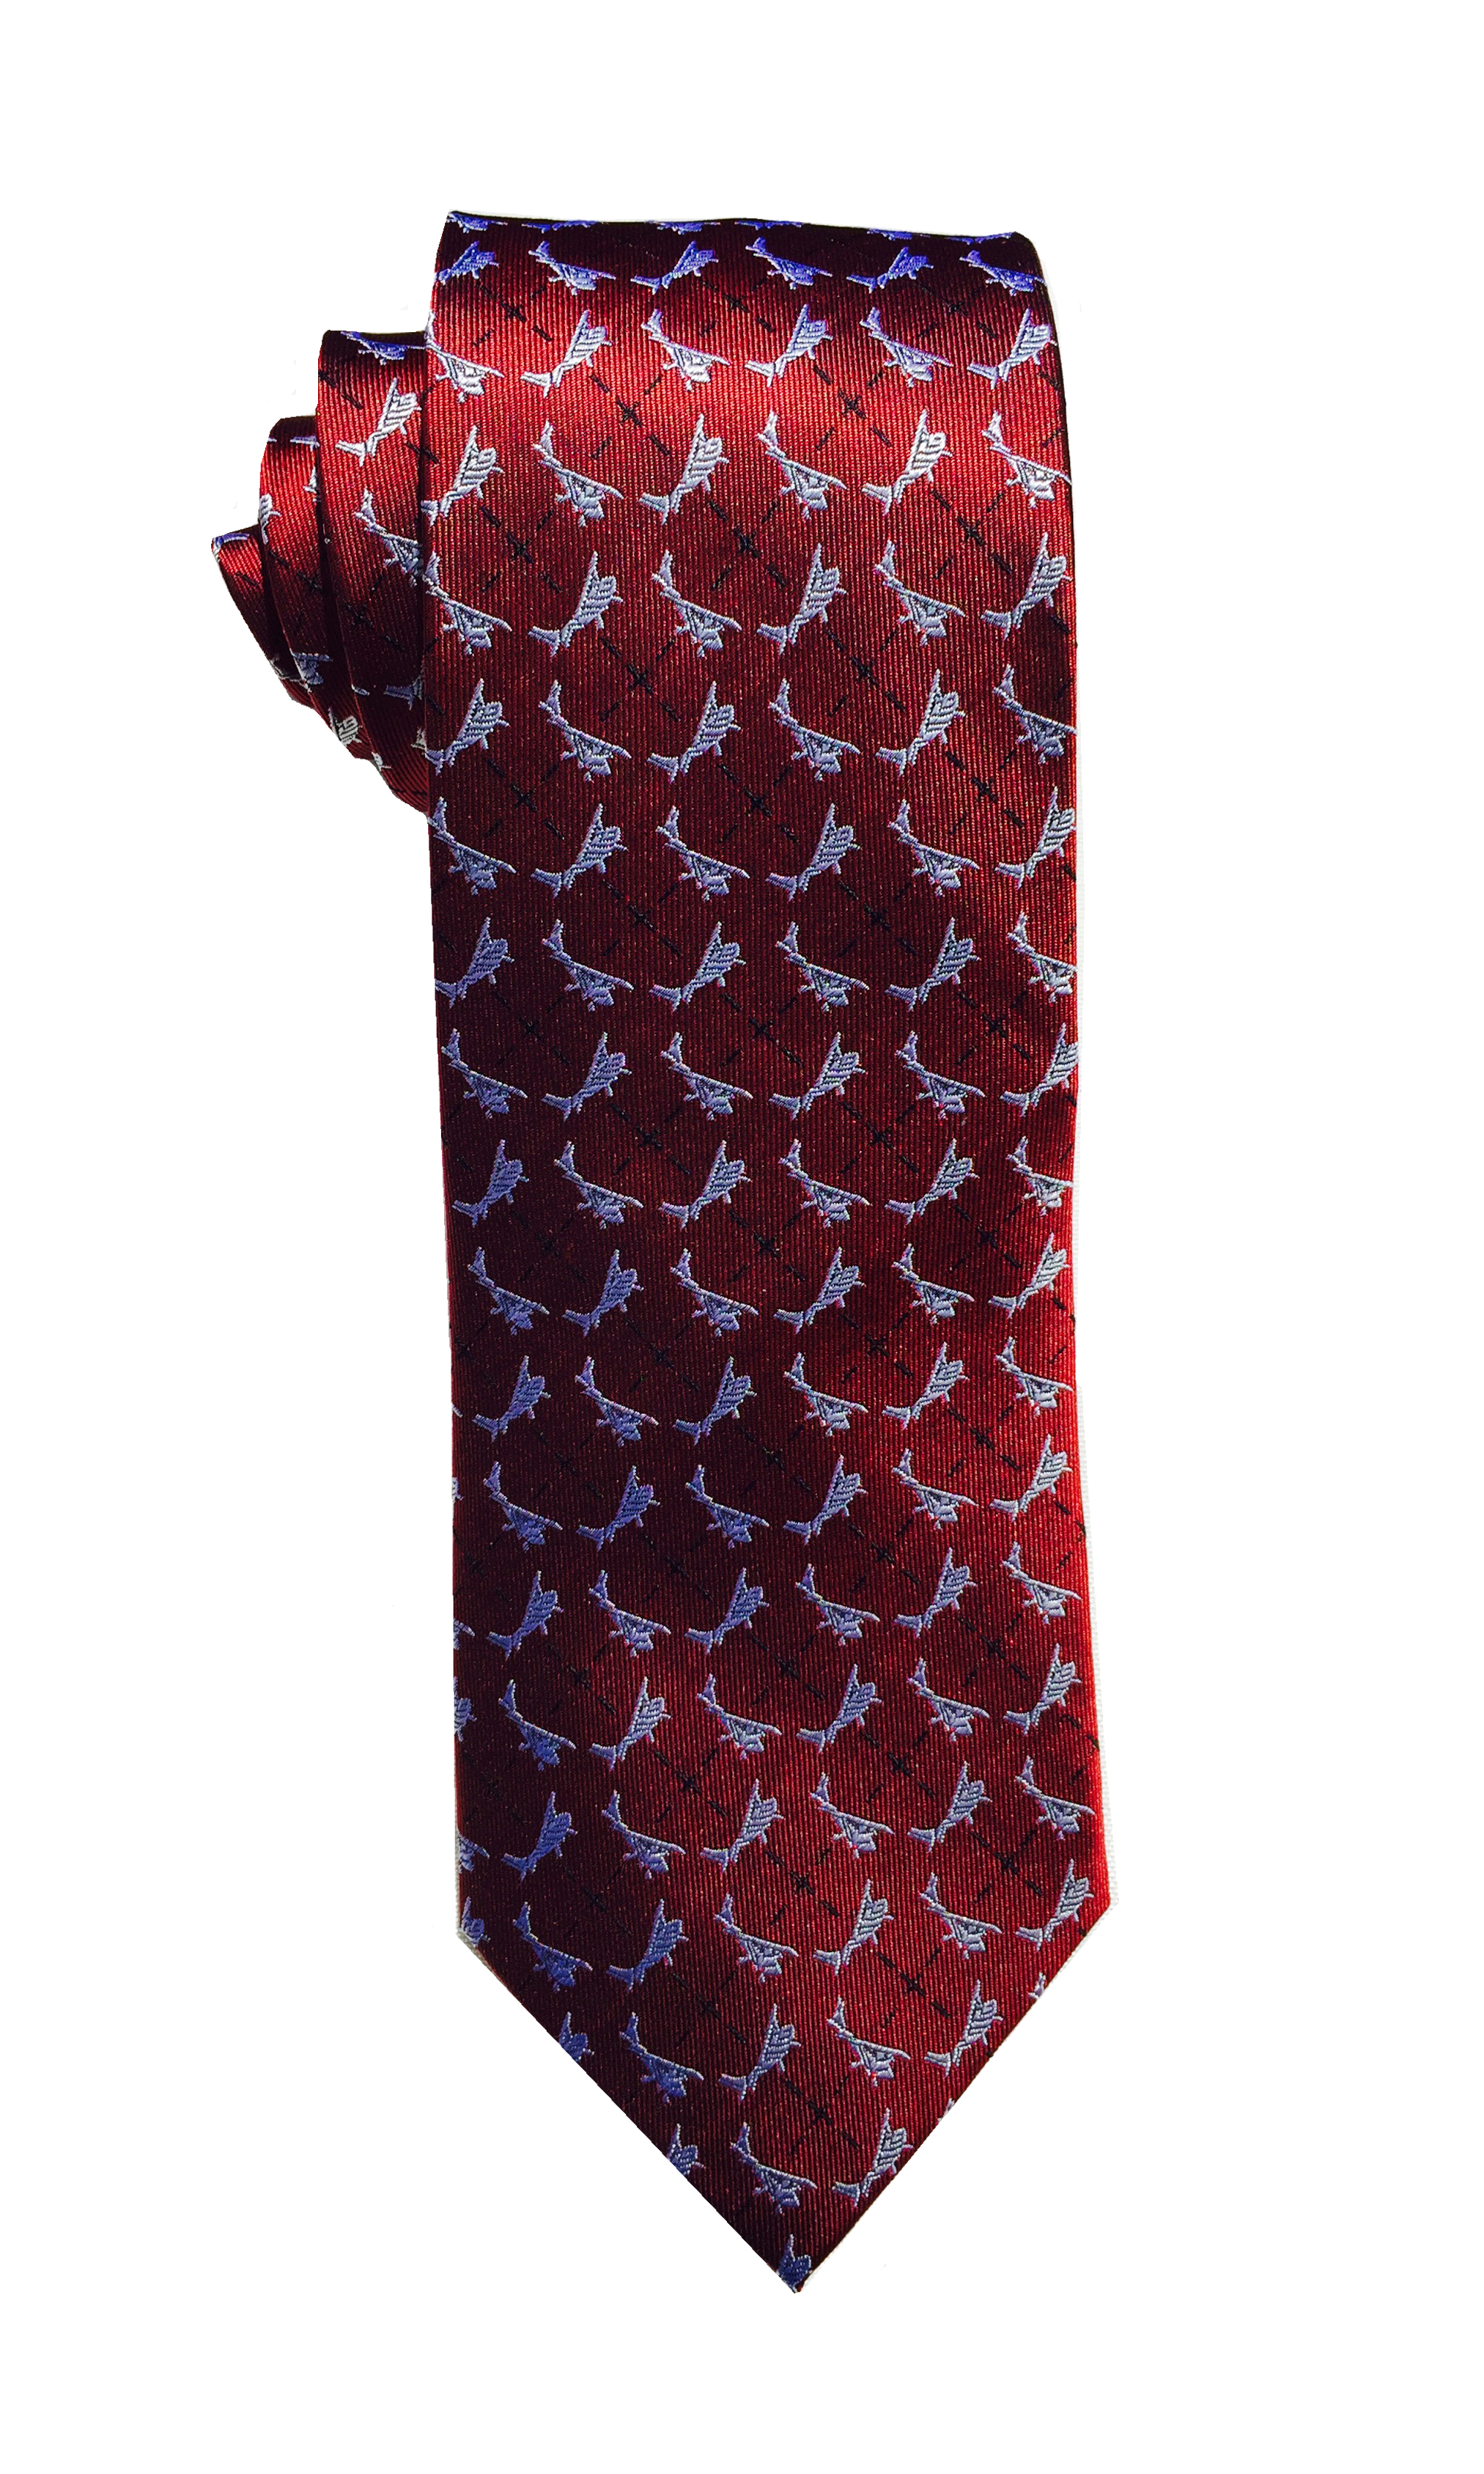 Cessna airplane  tie in red